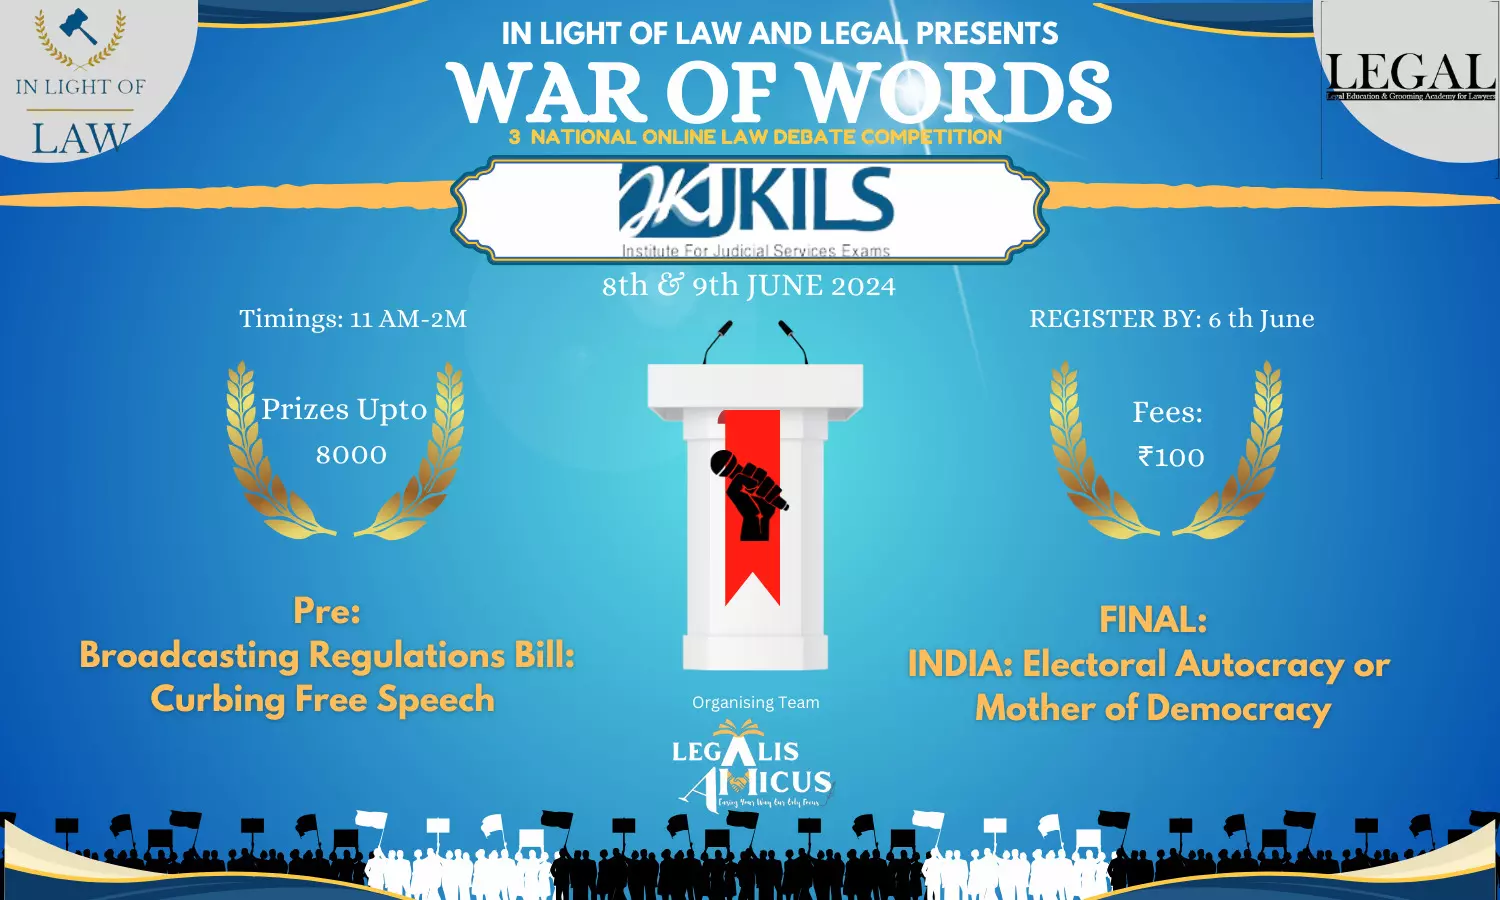 War of Words: 3rd Online National Debate Competition by In Light of Law [Cash Prizes worth 8,000]